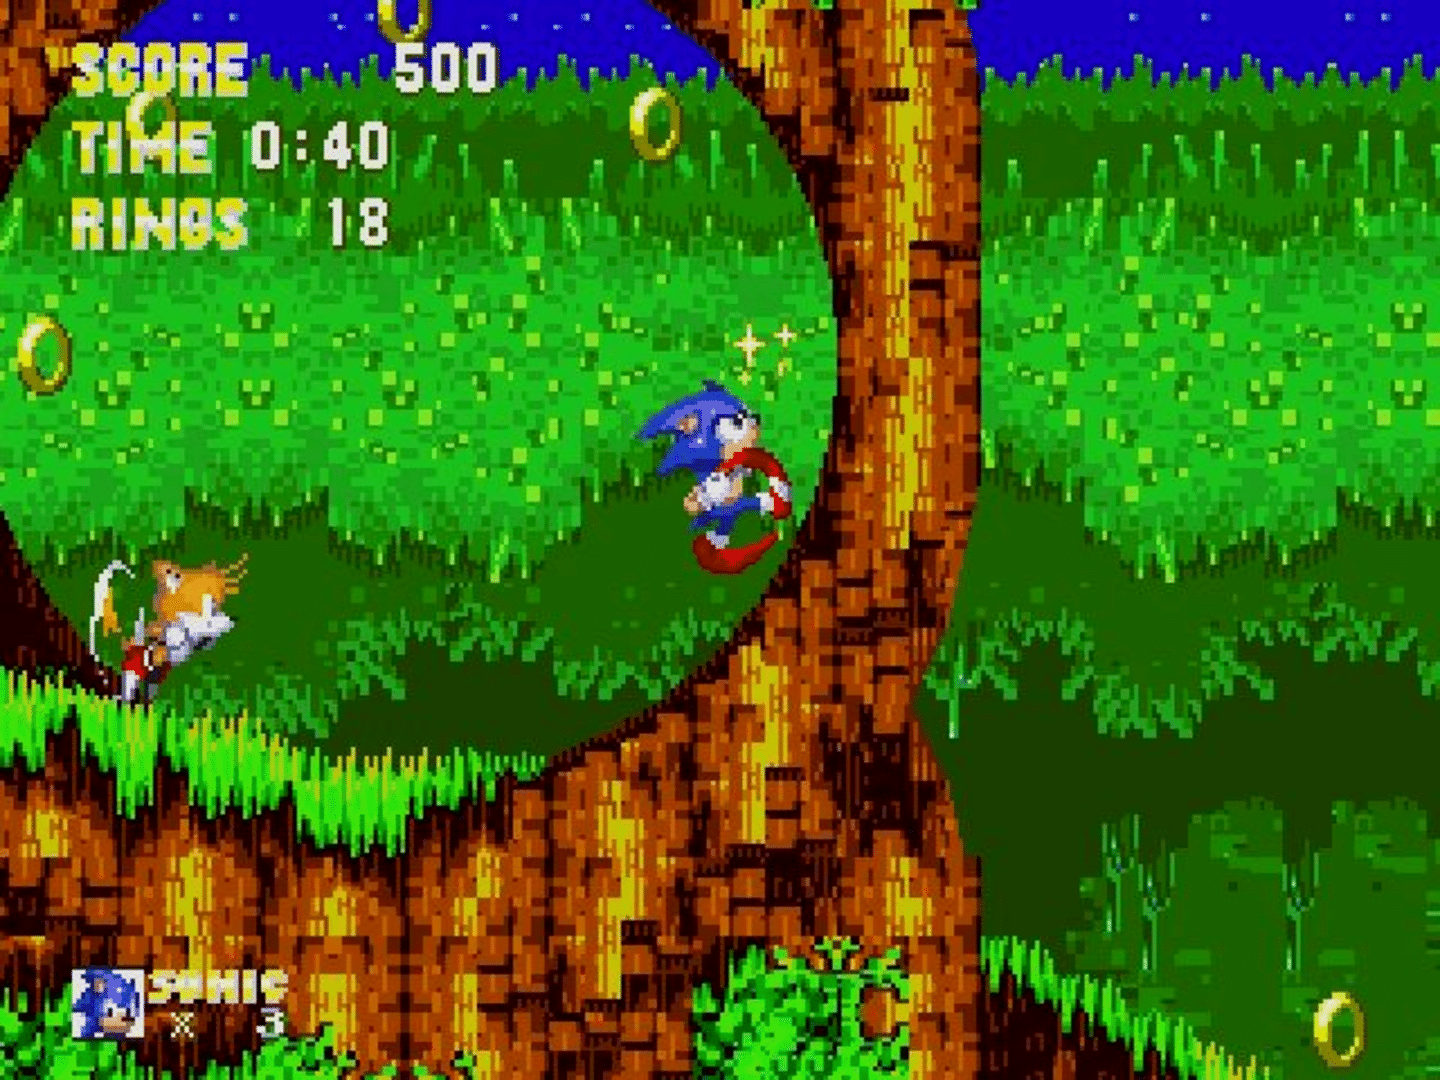 Sonic the Hedgehog 3 & Knuckles (1994)